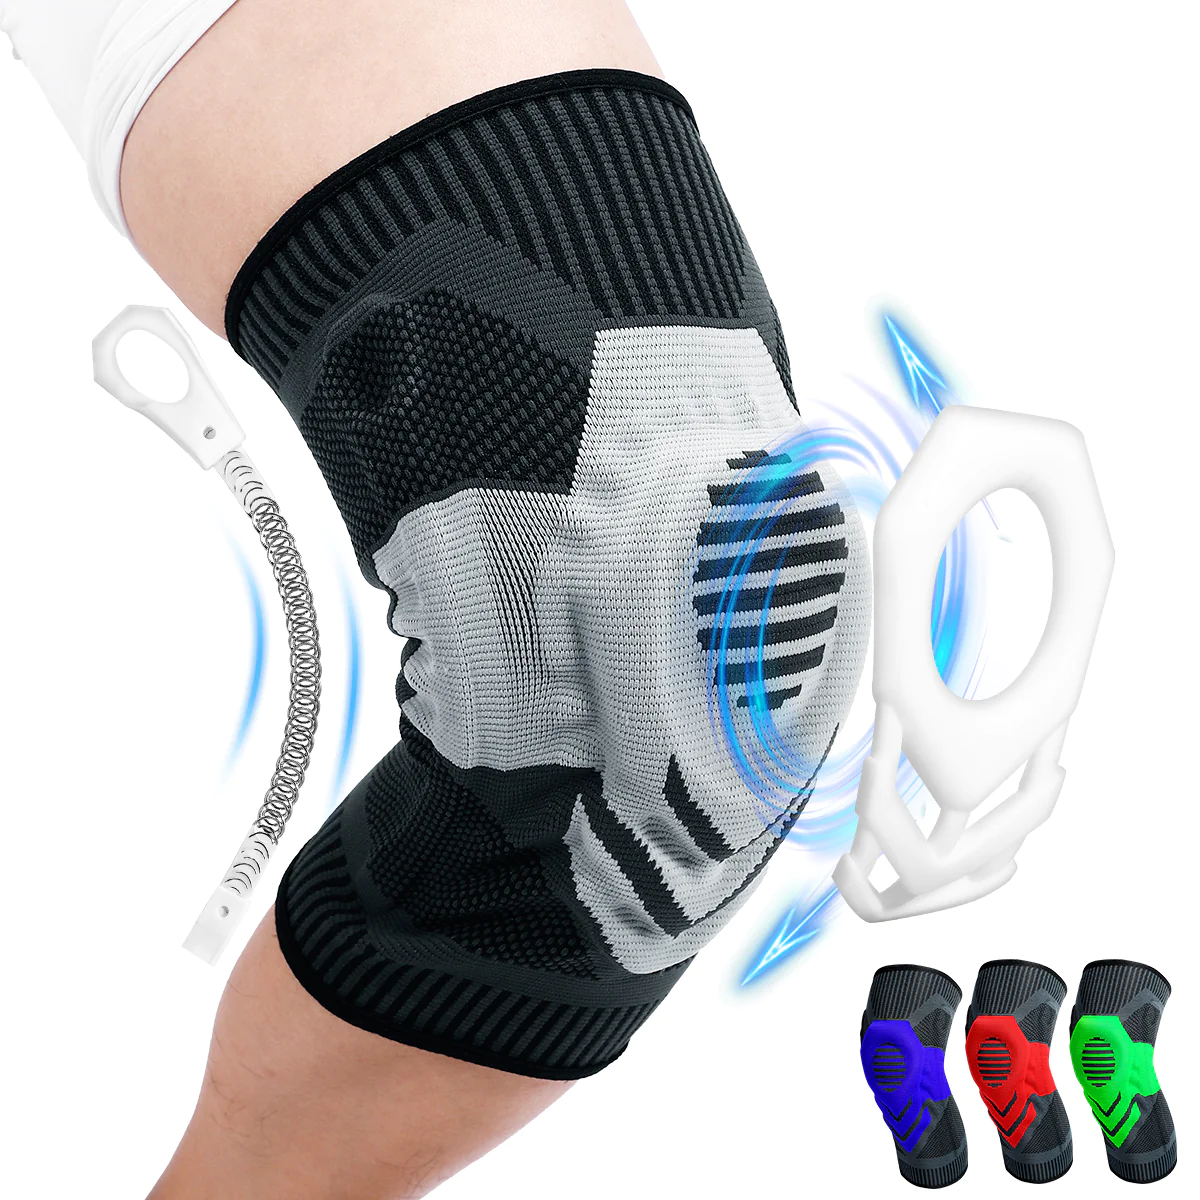 Improving Stability and Comfort for Peak Performance: The Fivali Compression Knee Brace